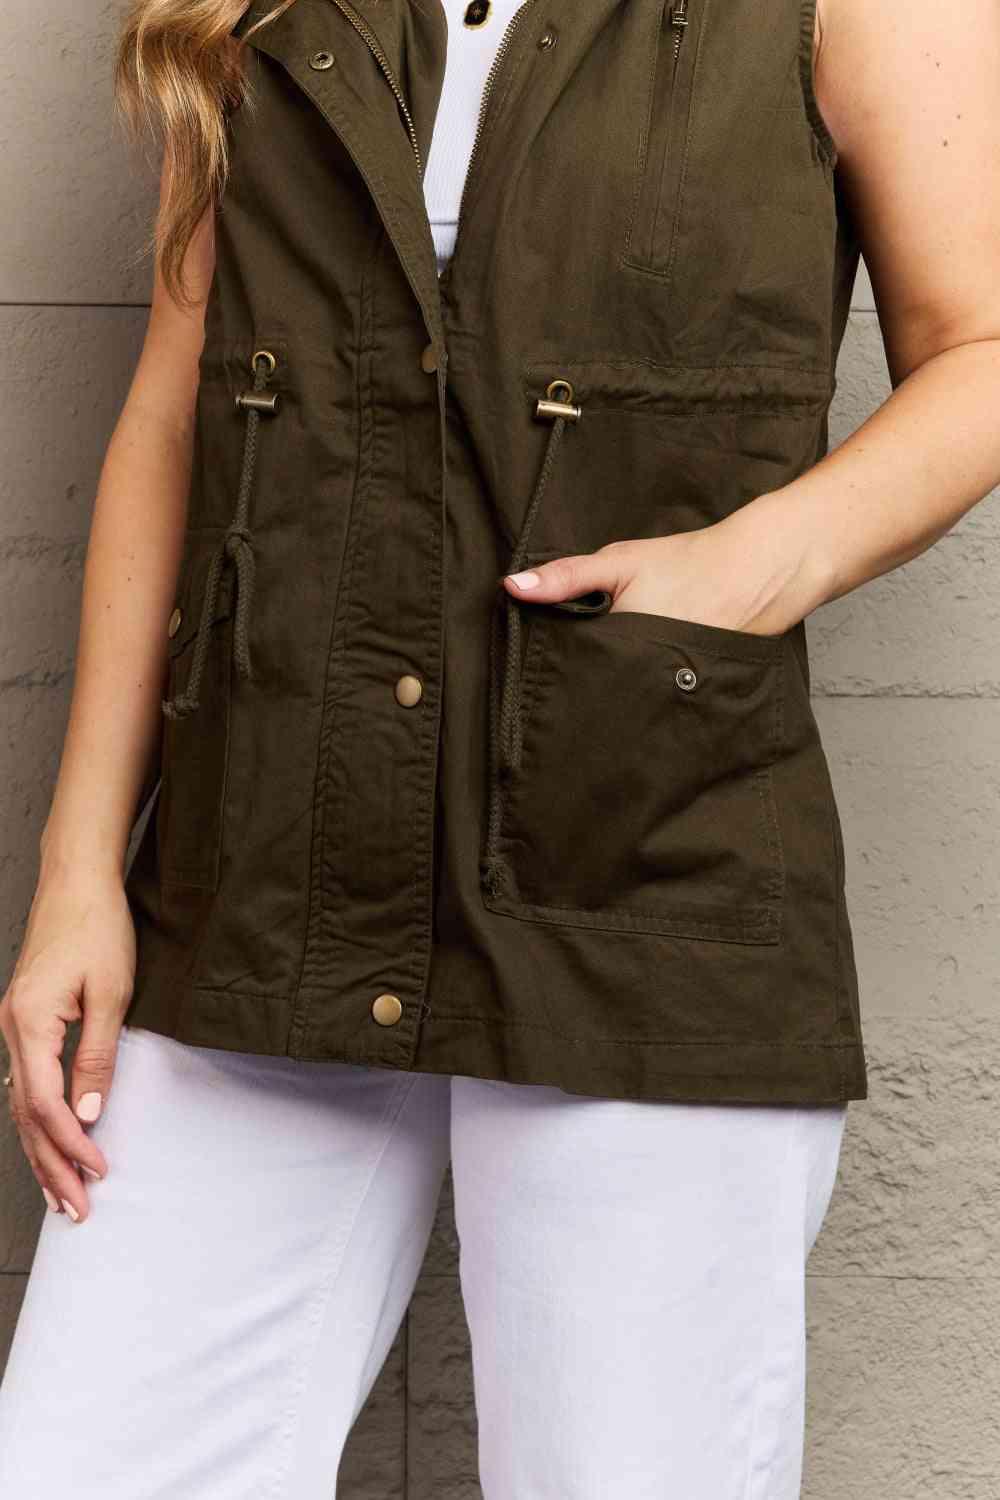 Zenana More To Come Full Size Military Hooded Vest - Immenzive